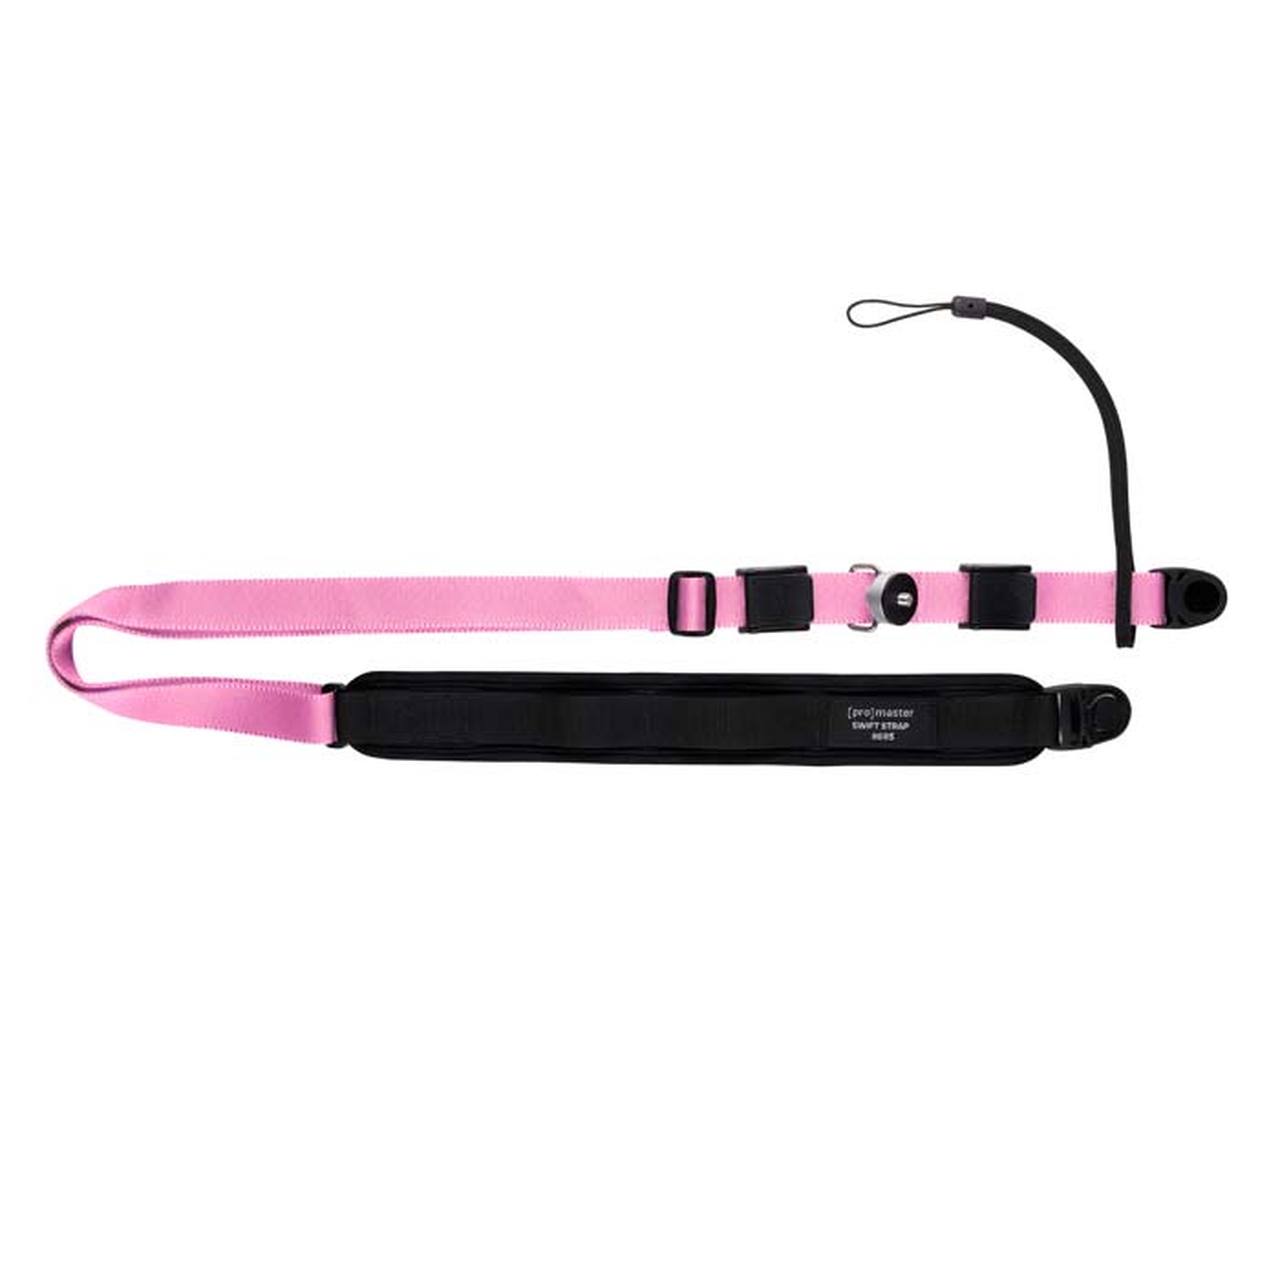 Promaster 8685  Swift Strap 2 for Compact or Mirrorless DSLR - Pink